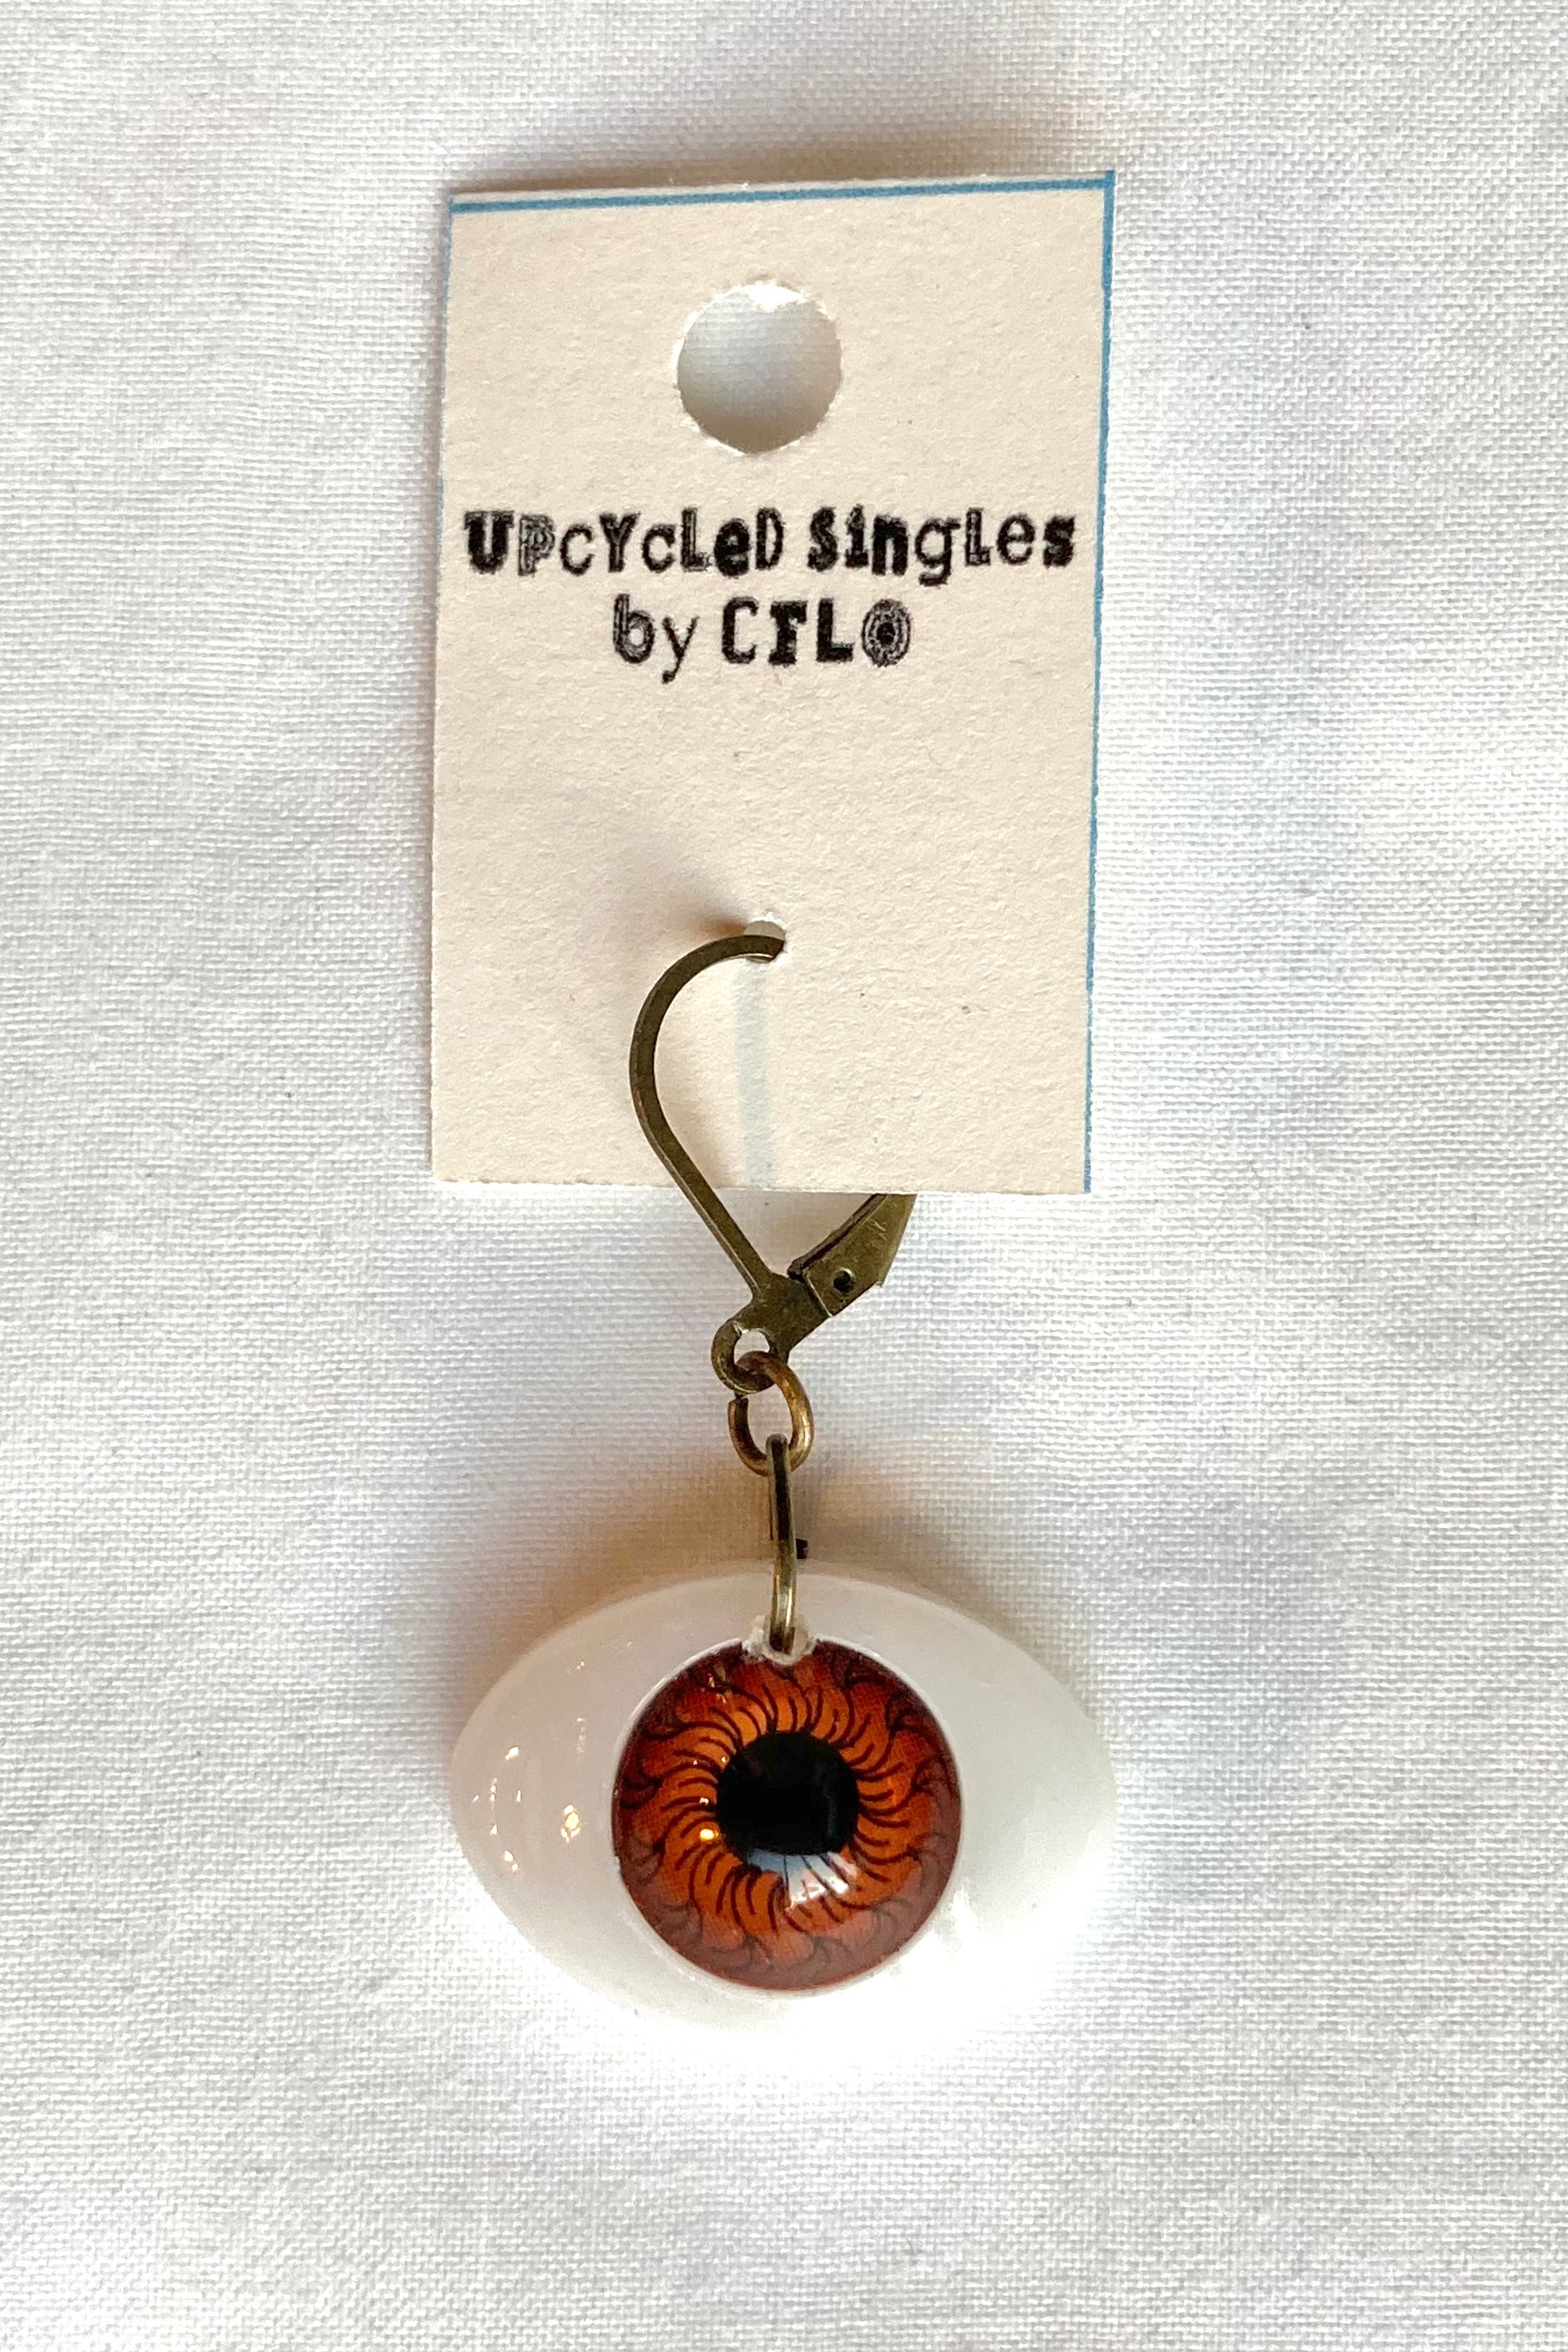 Upcycled Singles! Vintage Brown EYE Charm For Your Ears!